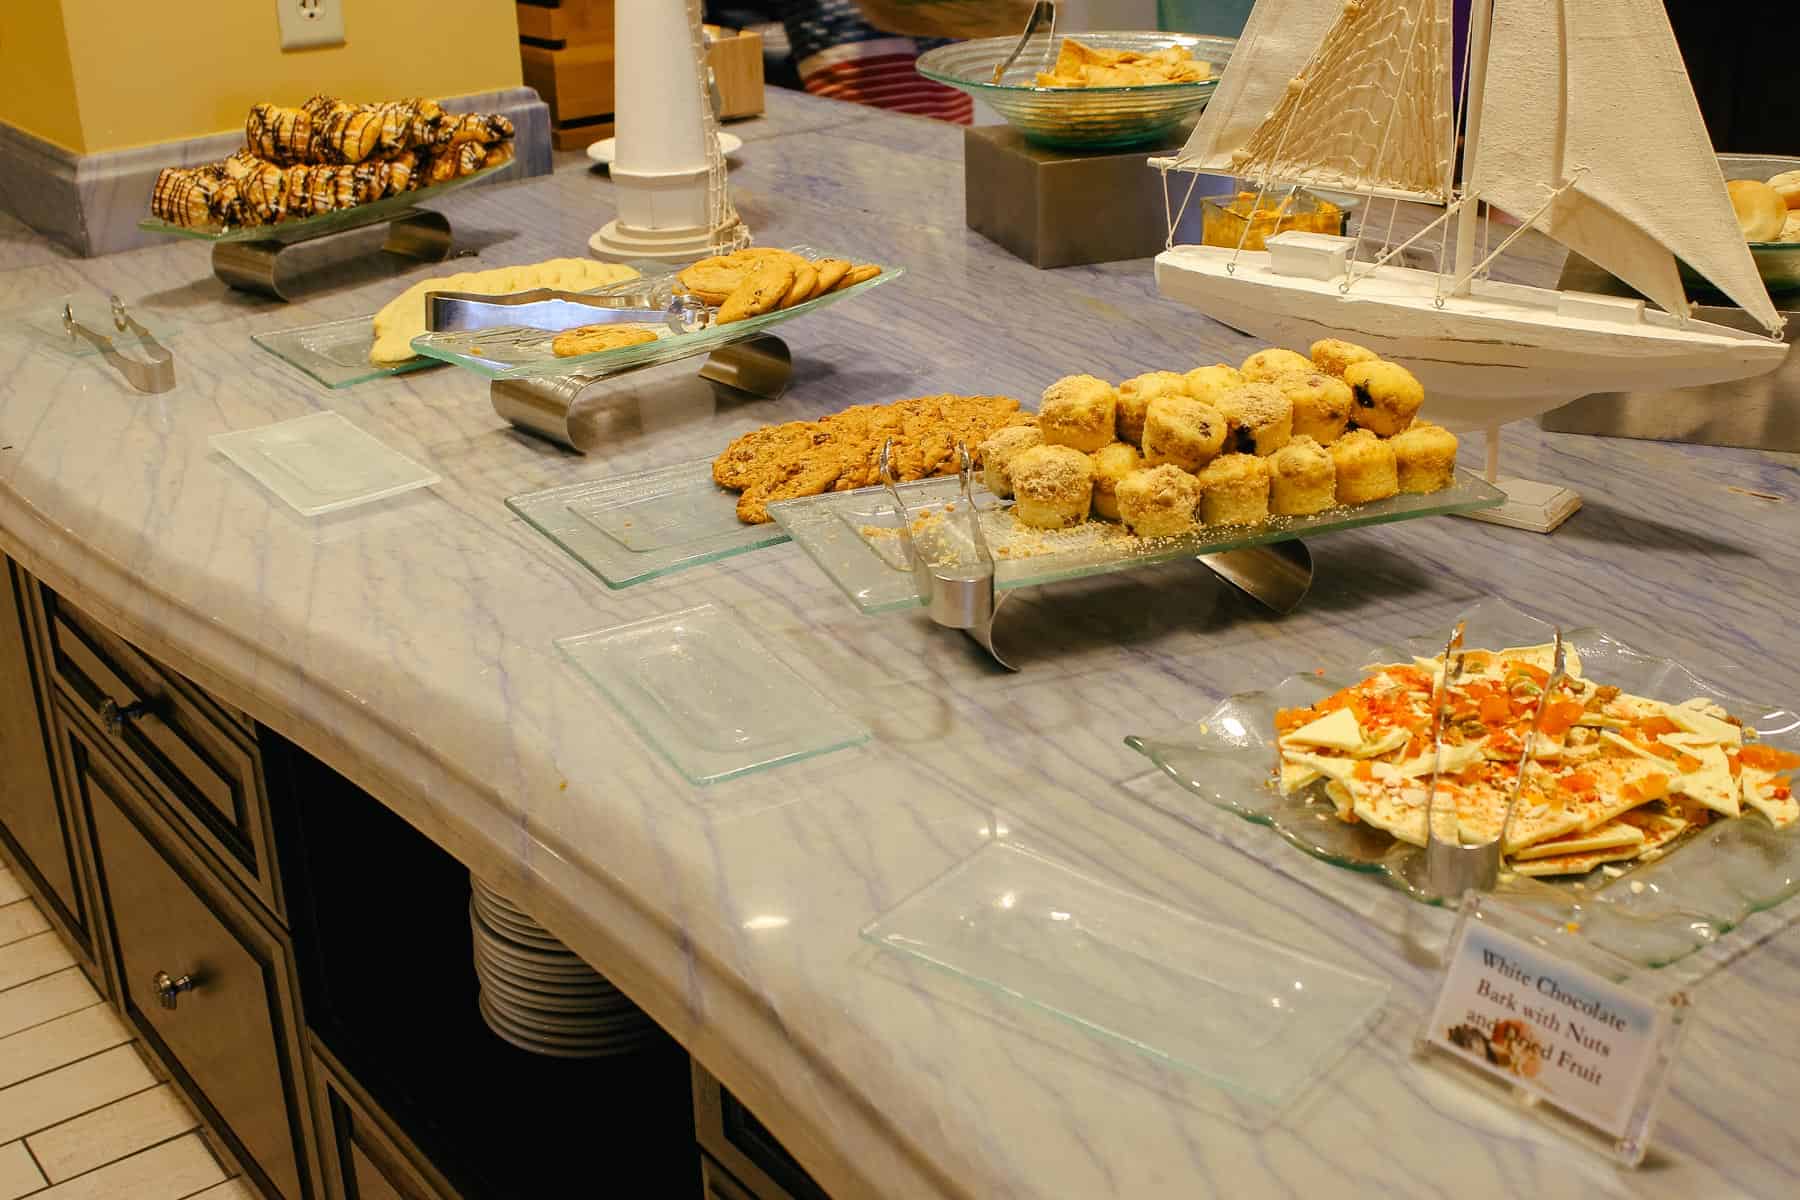 a tray of muffins, white chocolate bark with fruits, and other desserts 